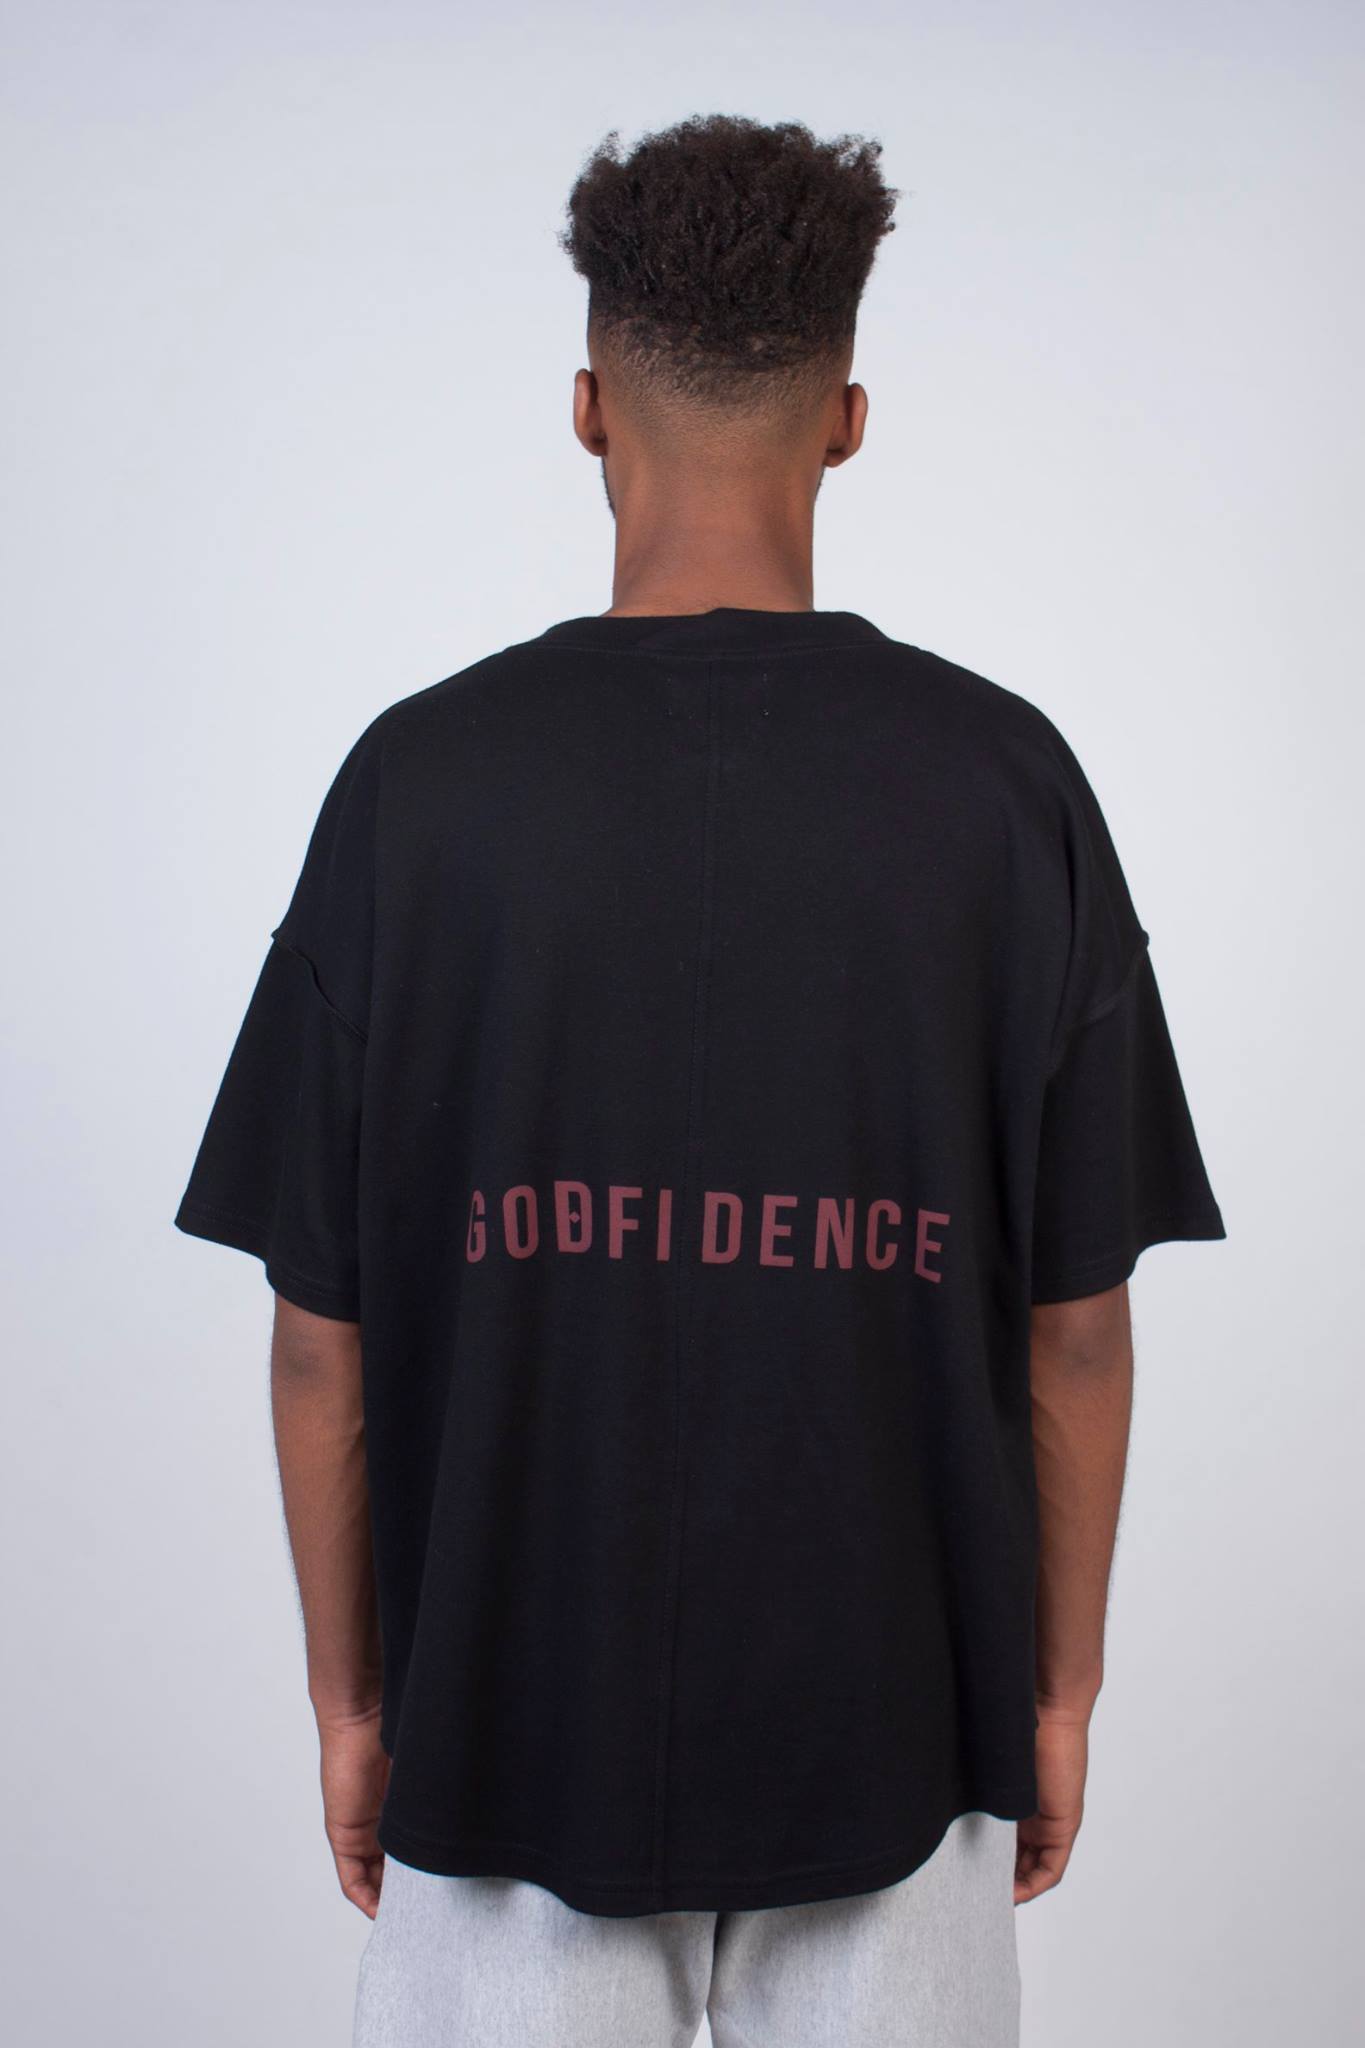 GODFIDENCE Chapter I “HERITAGE” Collection